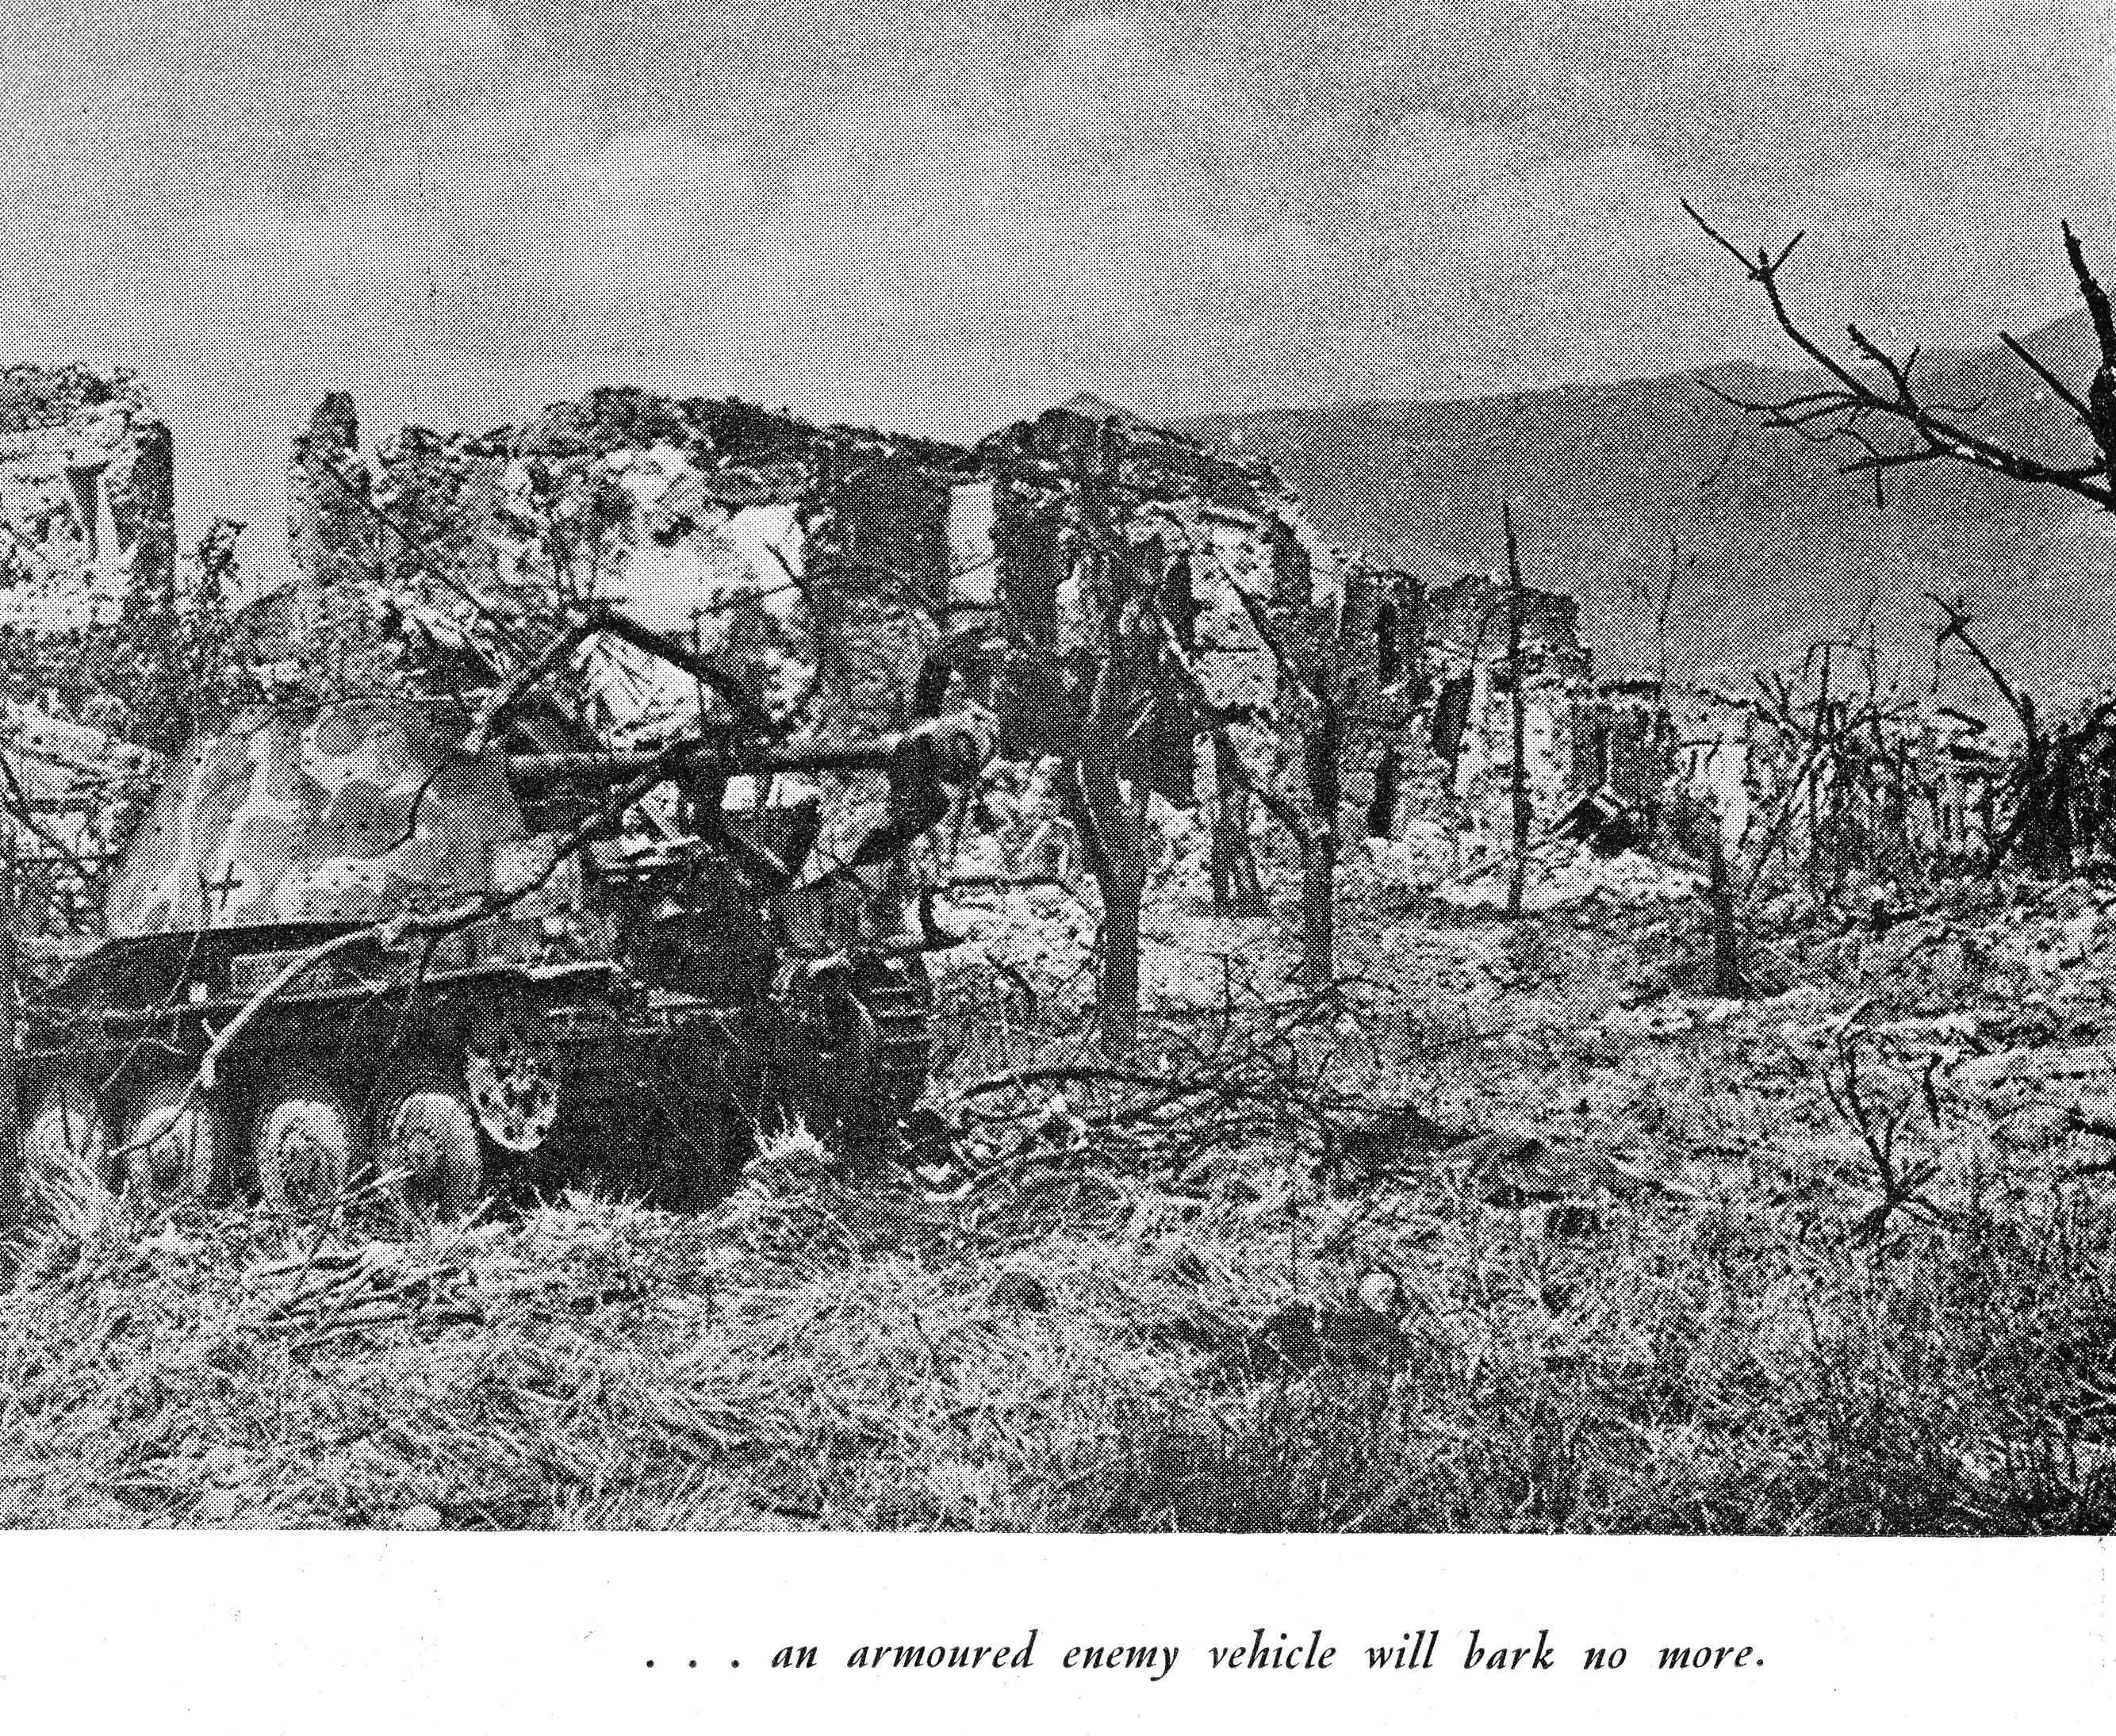 destroyed German tank in front of ruined buildings in Italy